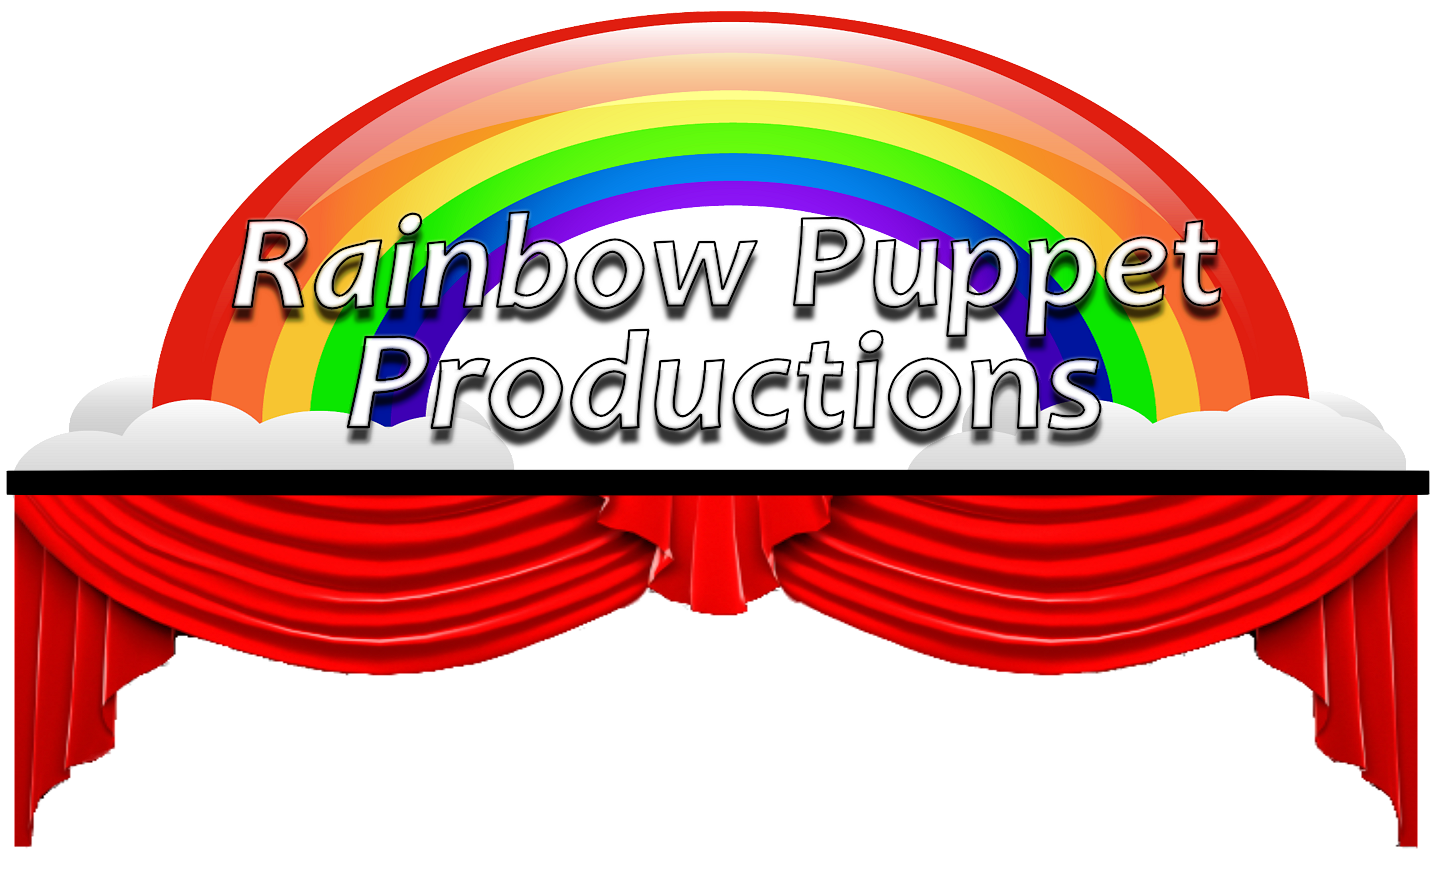 Rainbow Puppets will present a show on Thursday, July 18, at 11:00 A.M.